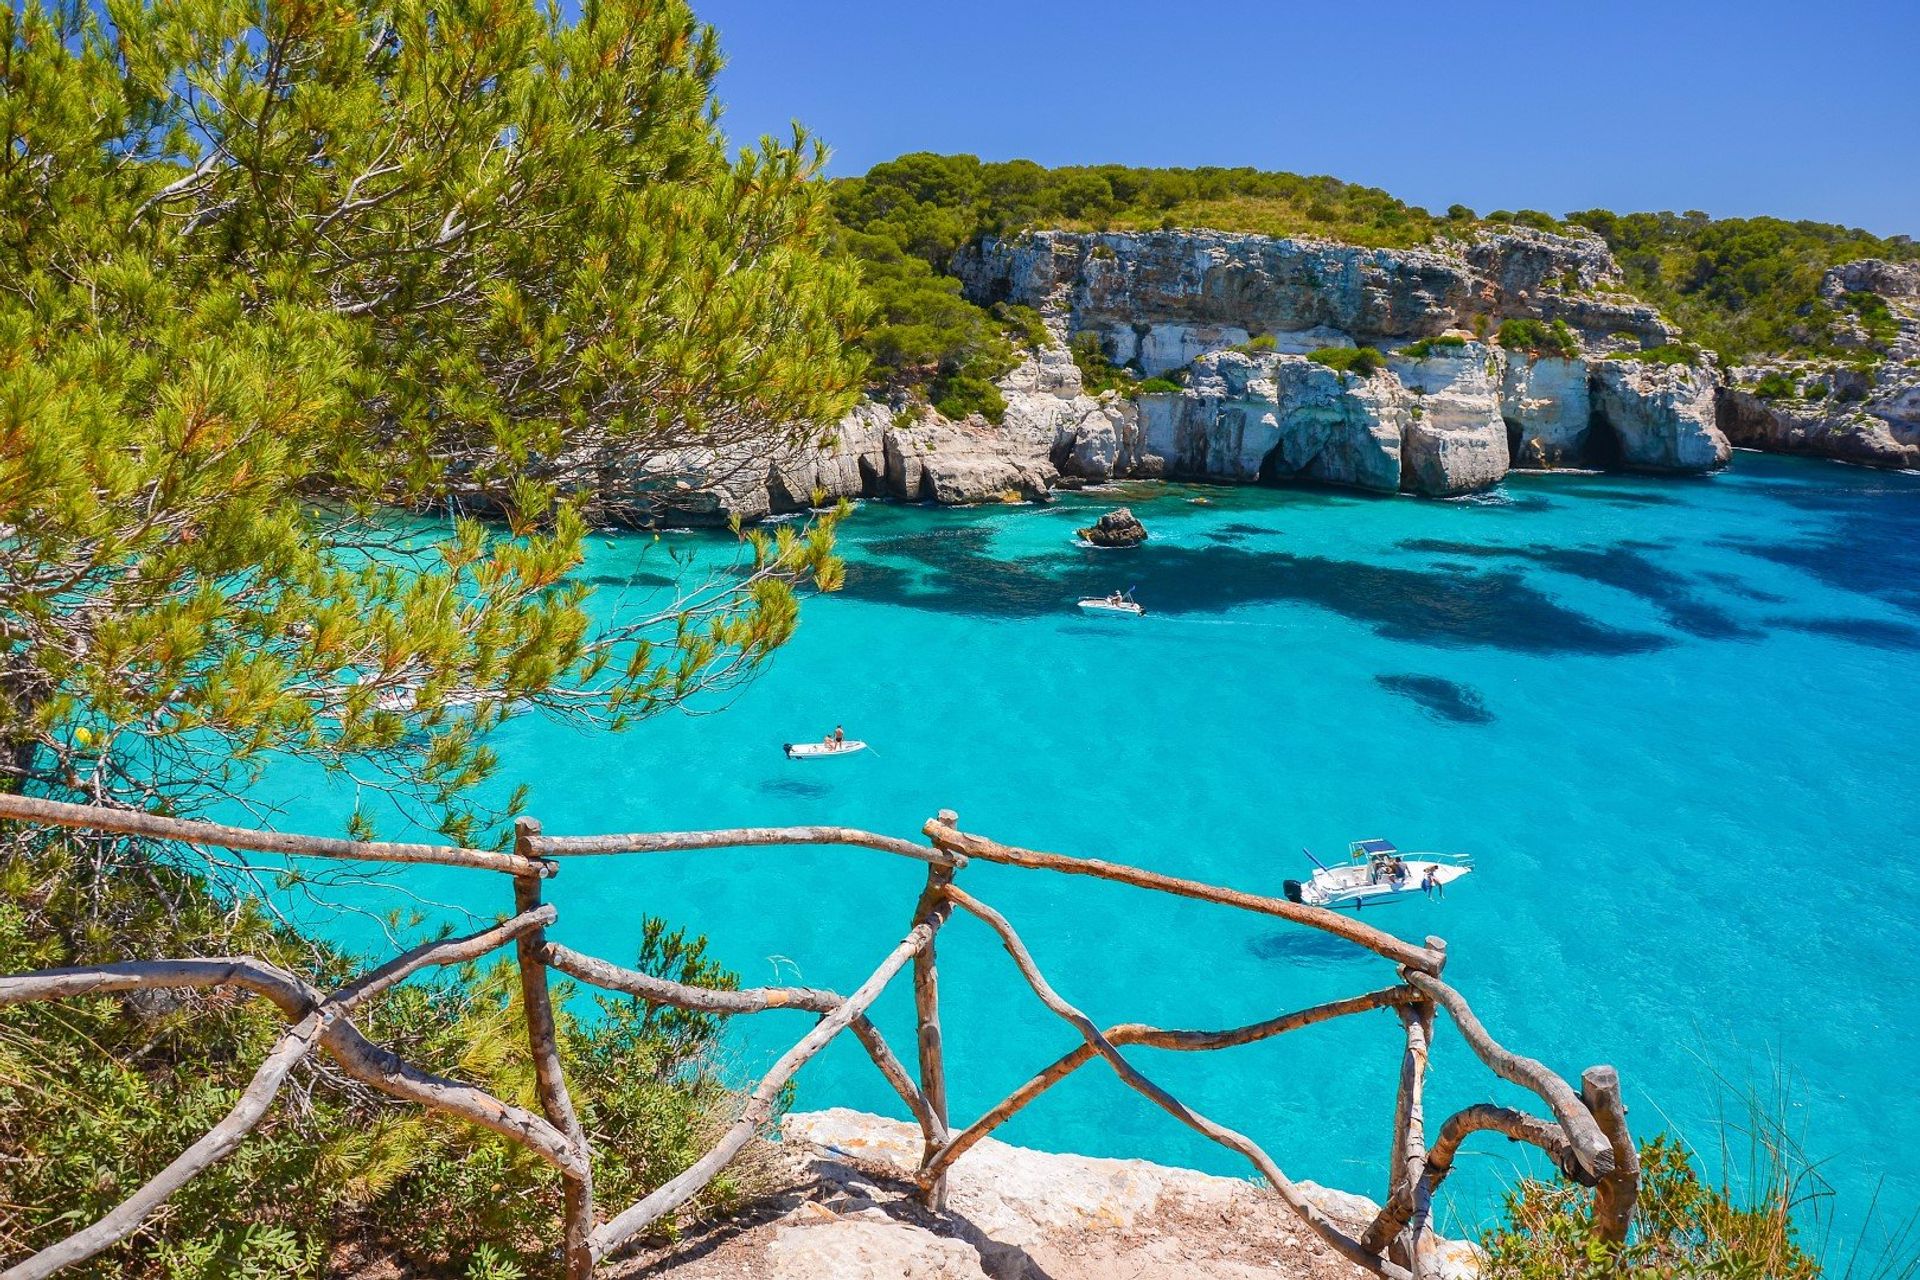 The crystal clear waters of Cala Macareletta bay, southern Menorca